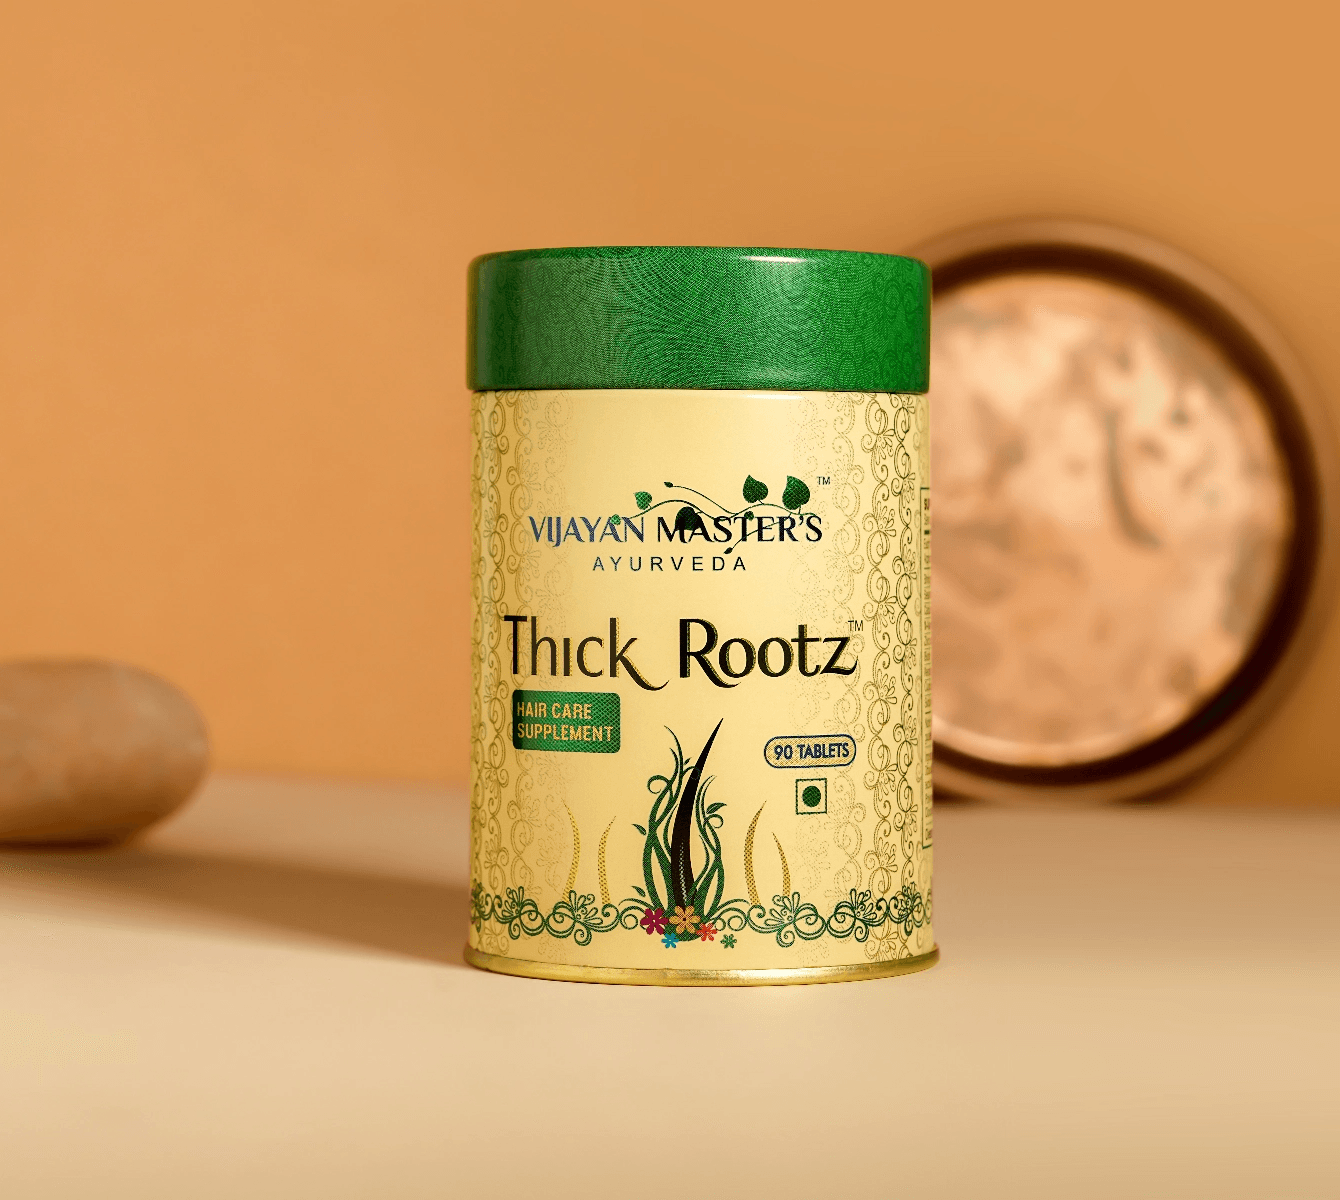 Thick Rootz Hair Care Supplement - Ayurvedic Tablets for Hair Growth